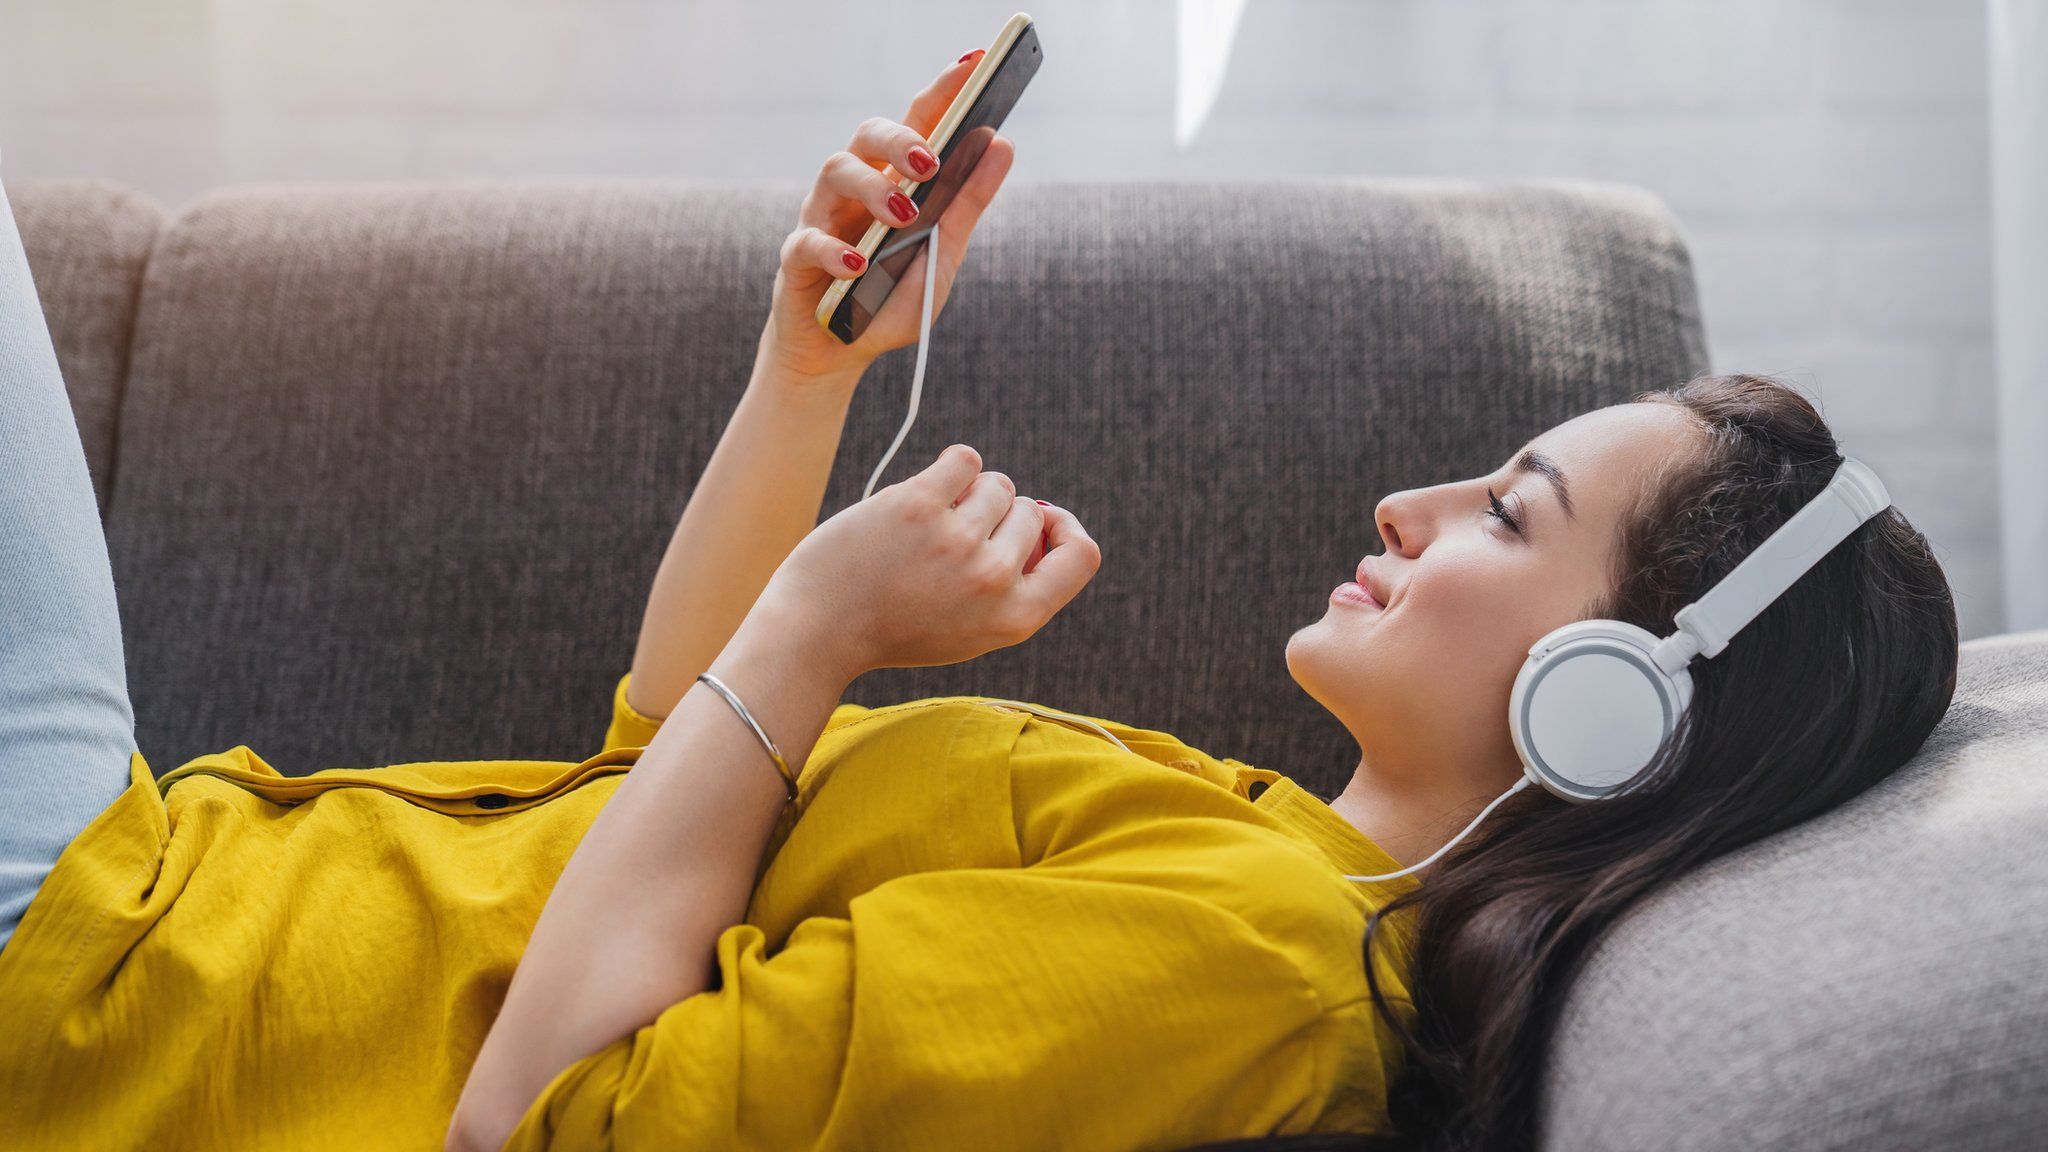 A woman listening to music using headphone (stock image)